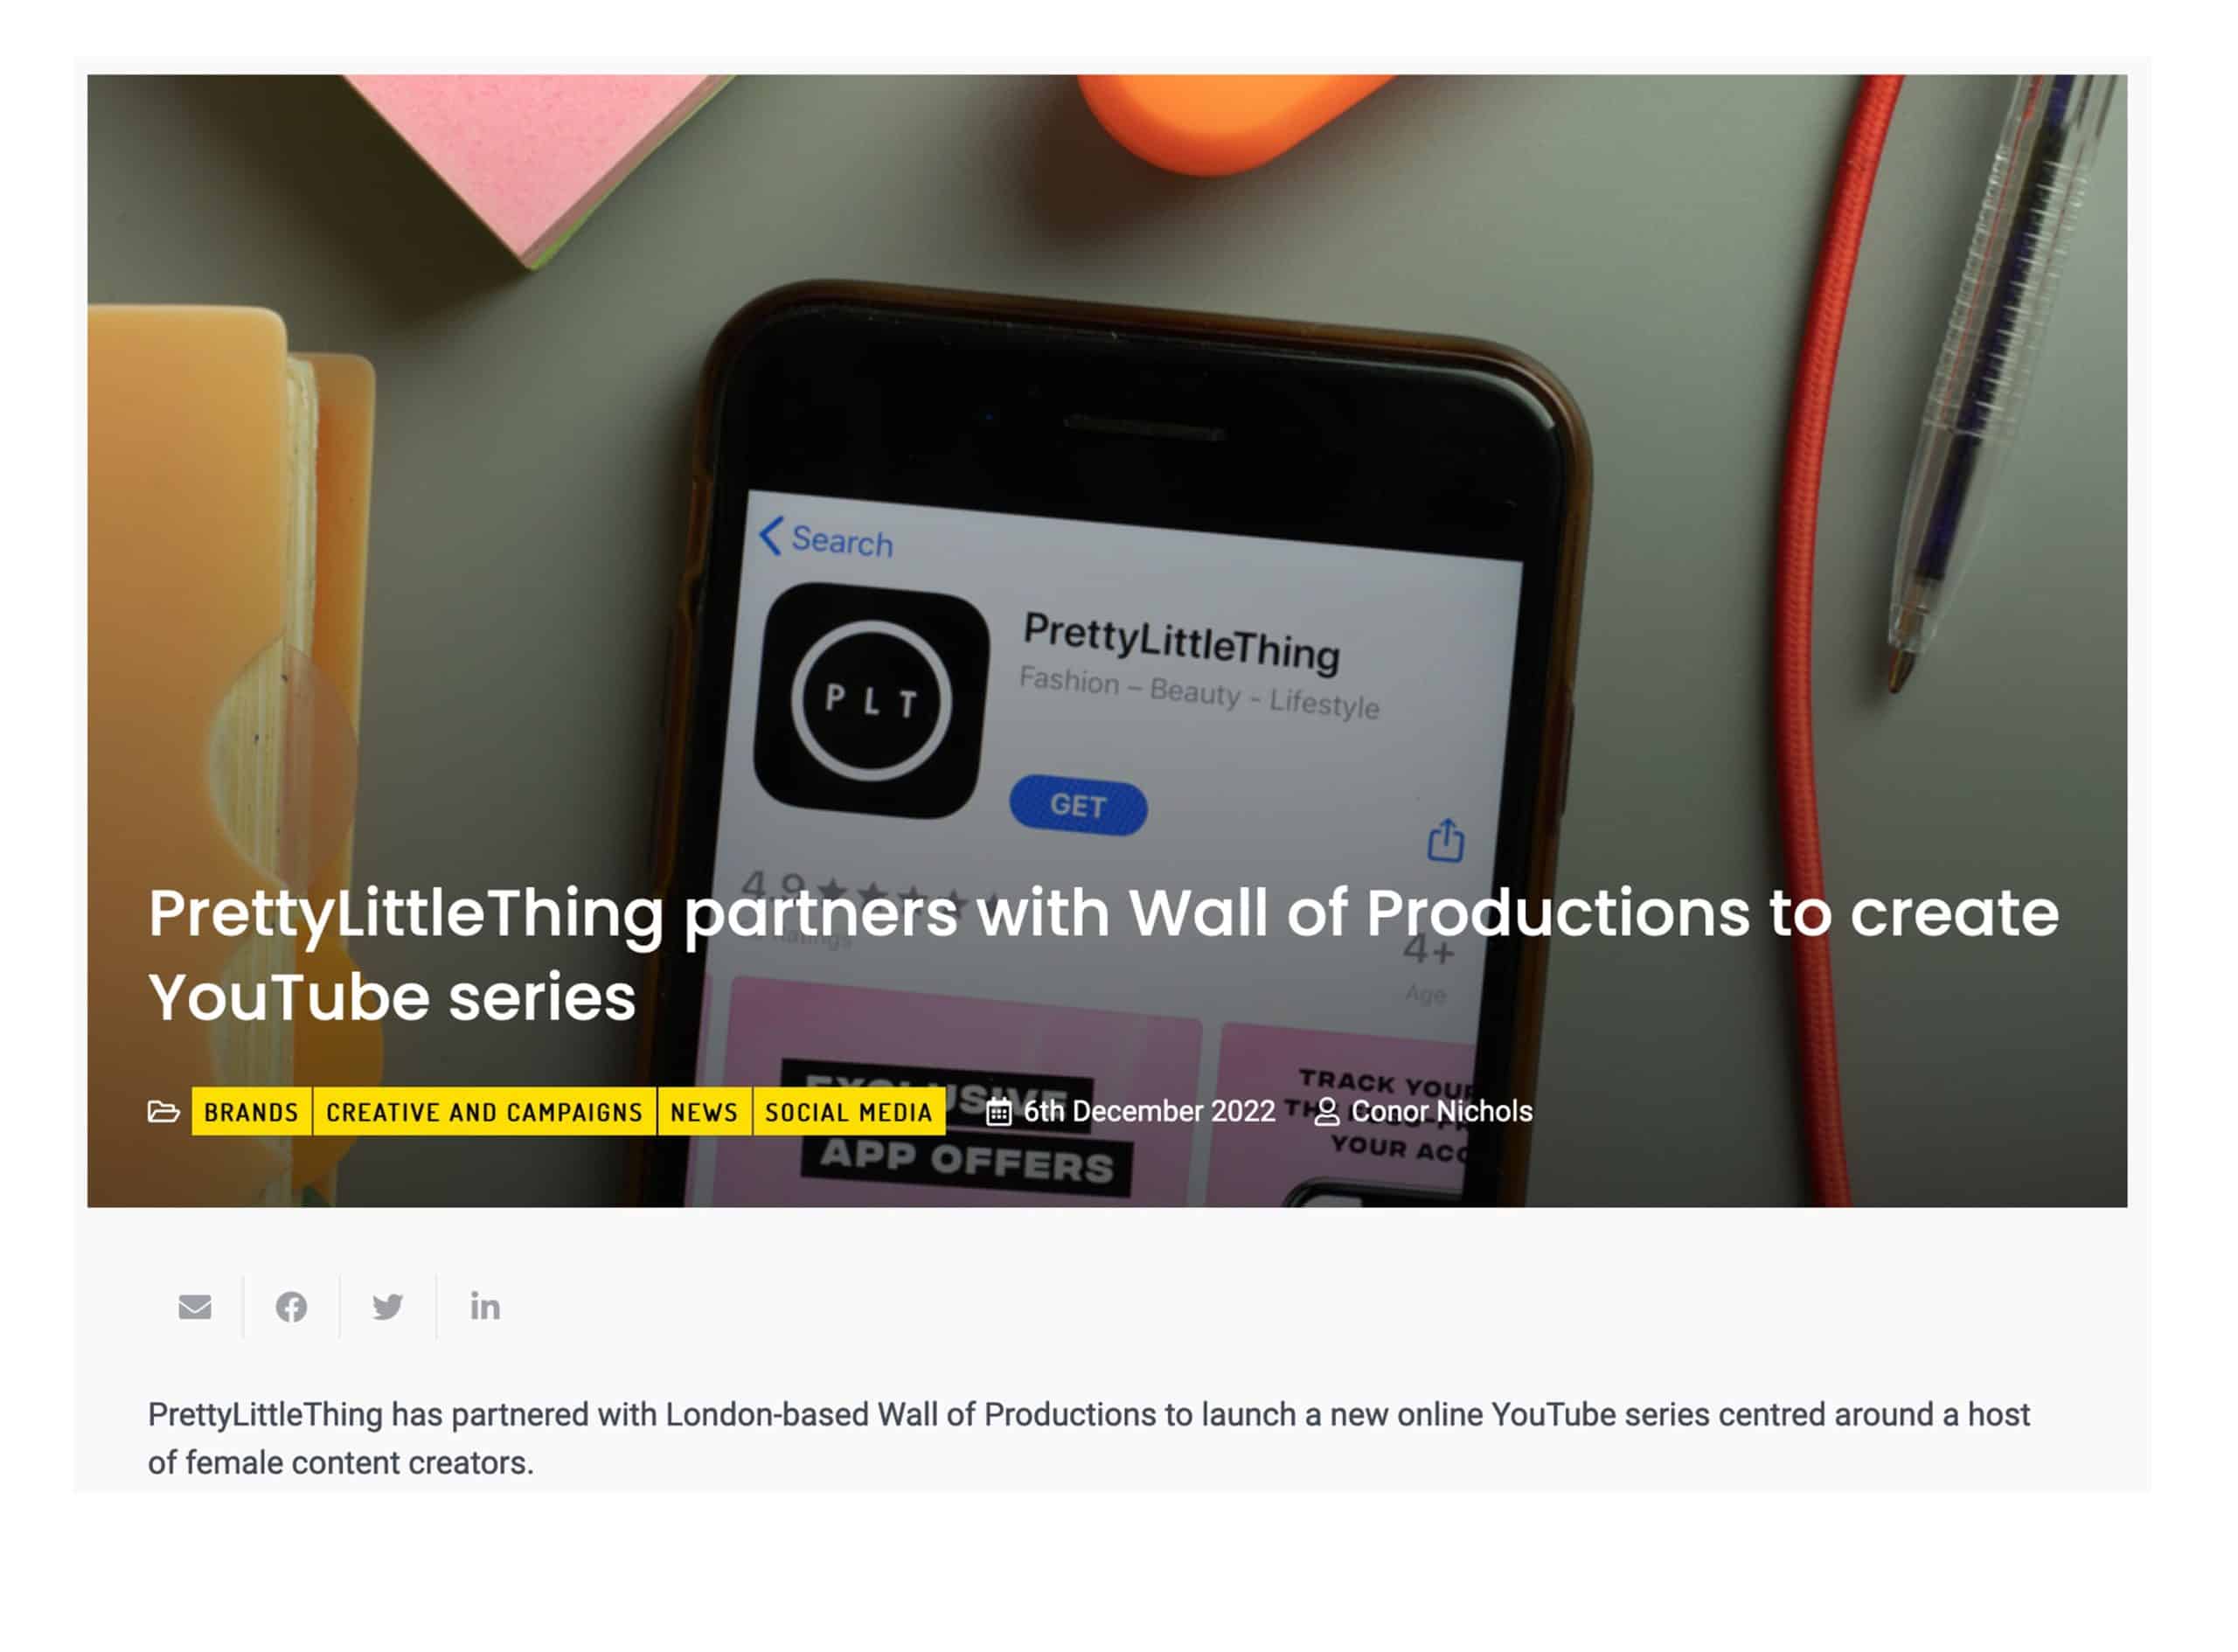 PrettyLittleThing partners with Wall of Productions to create Youtube series